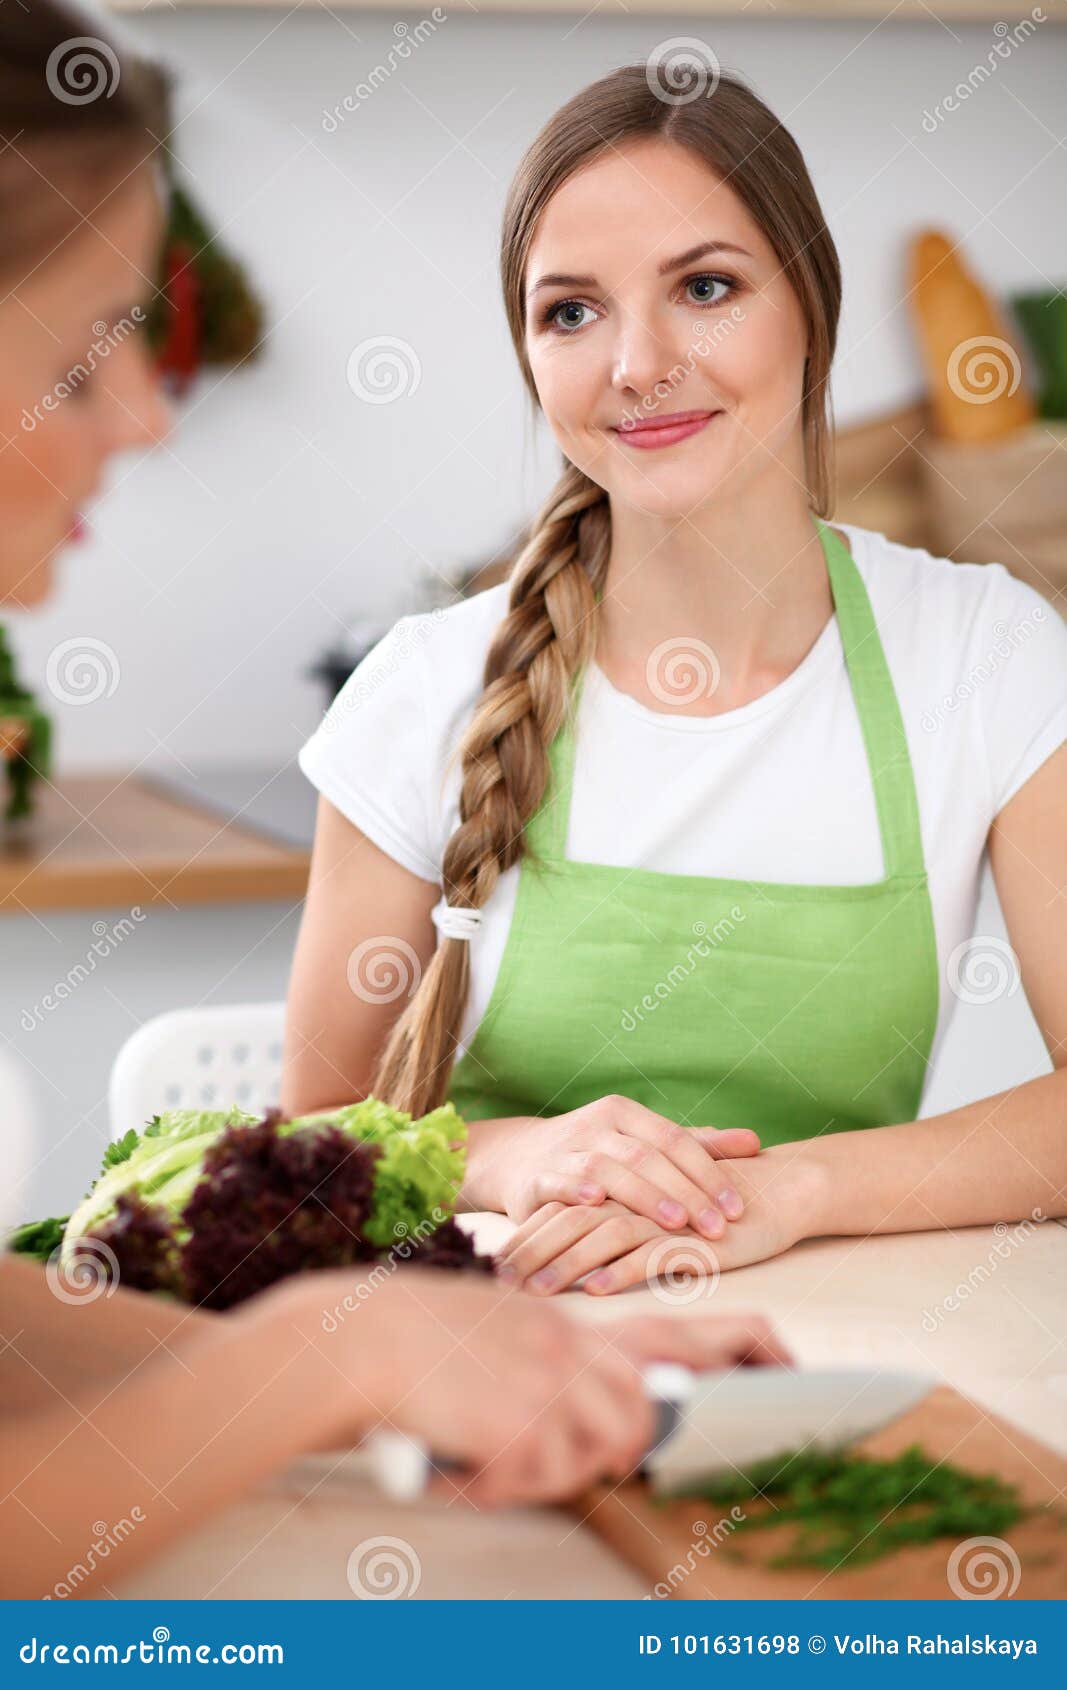 Two Women Is Cooking In A Kitchen Friends Having A